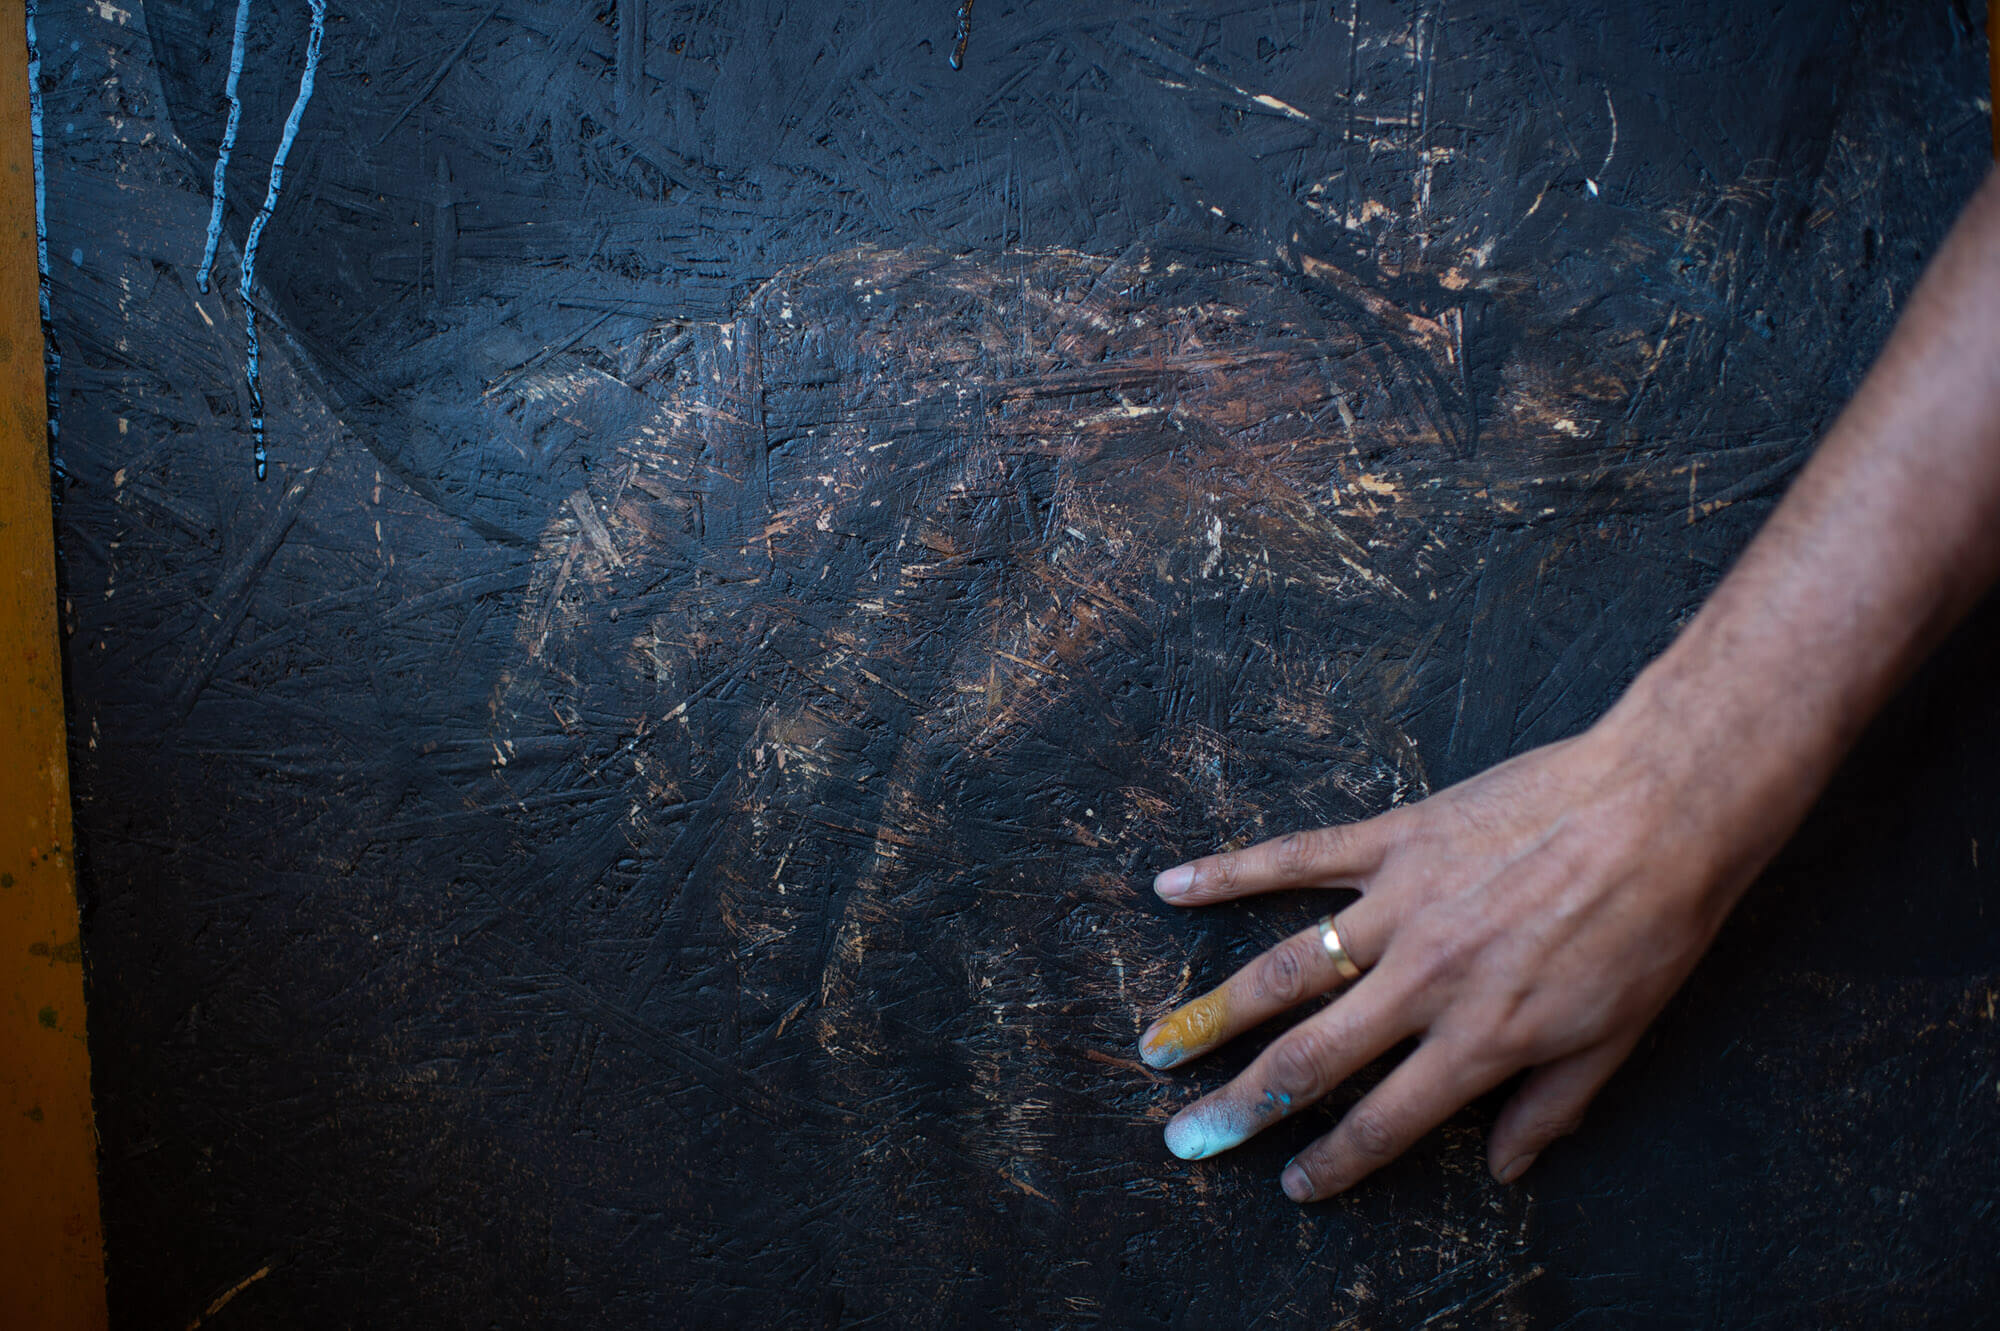 NIMI’s hand on one of his works